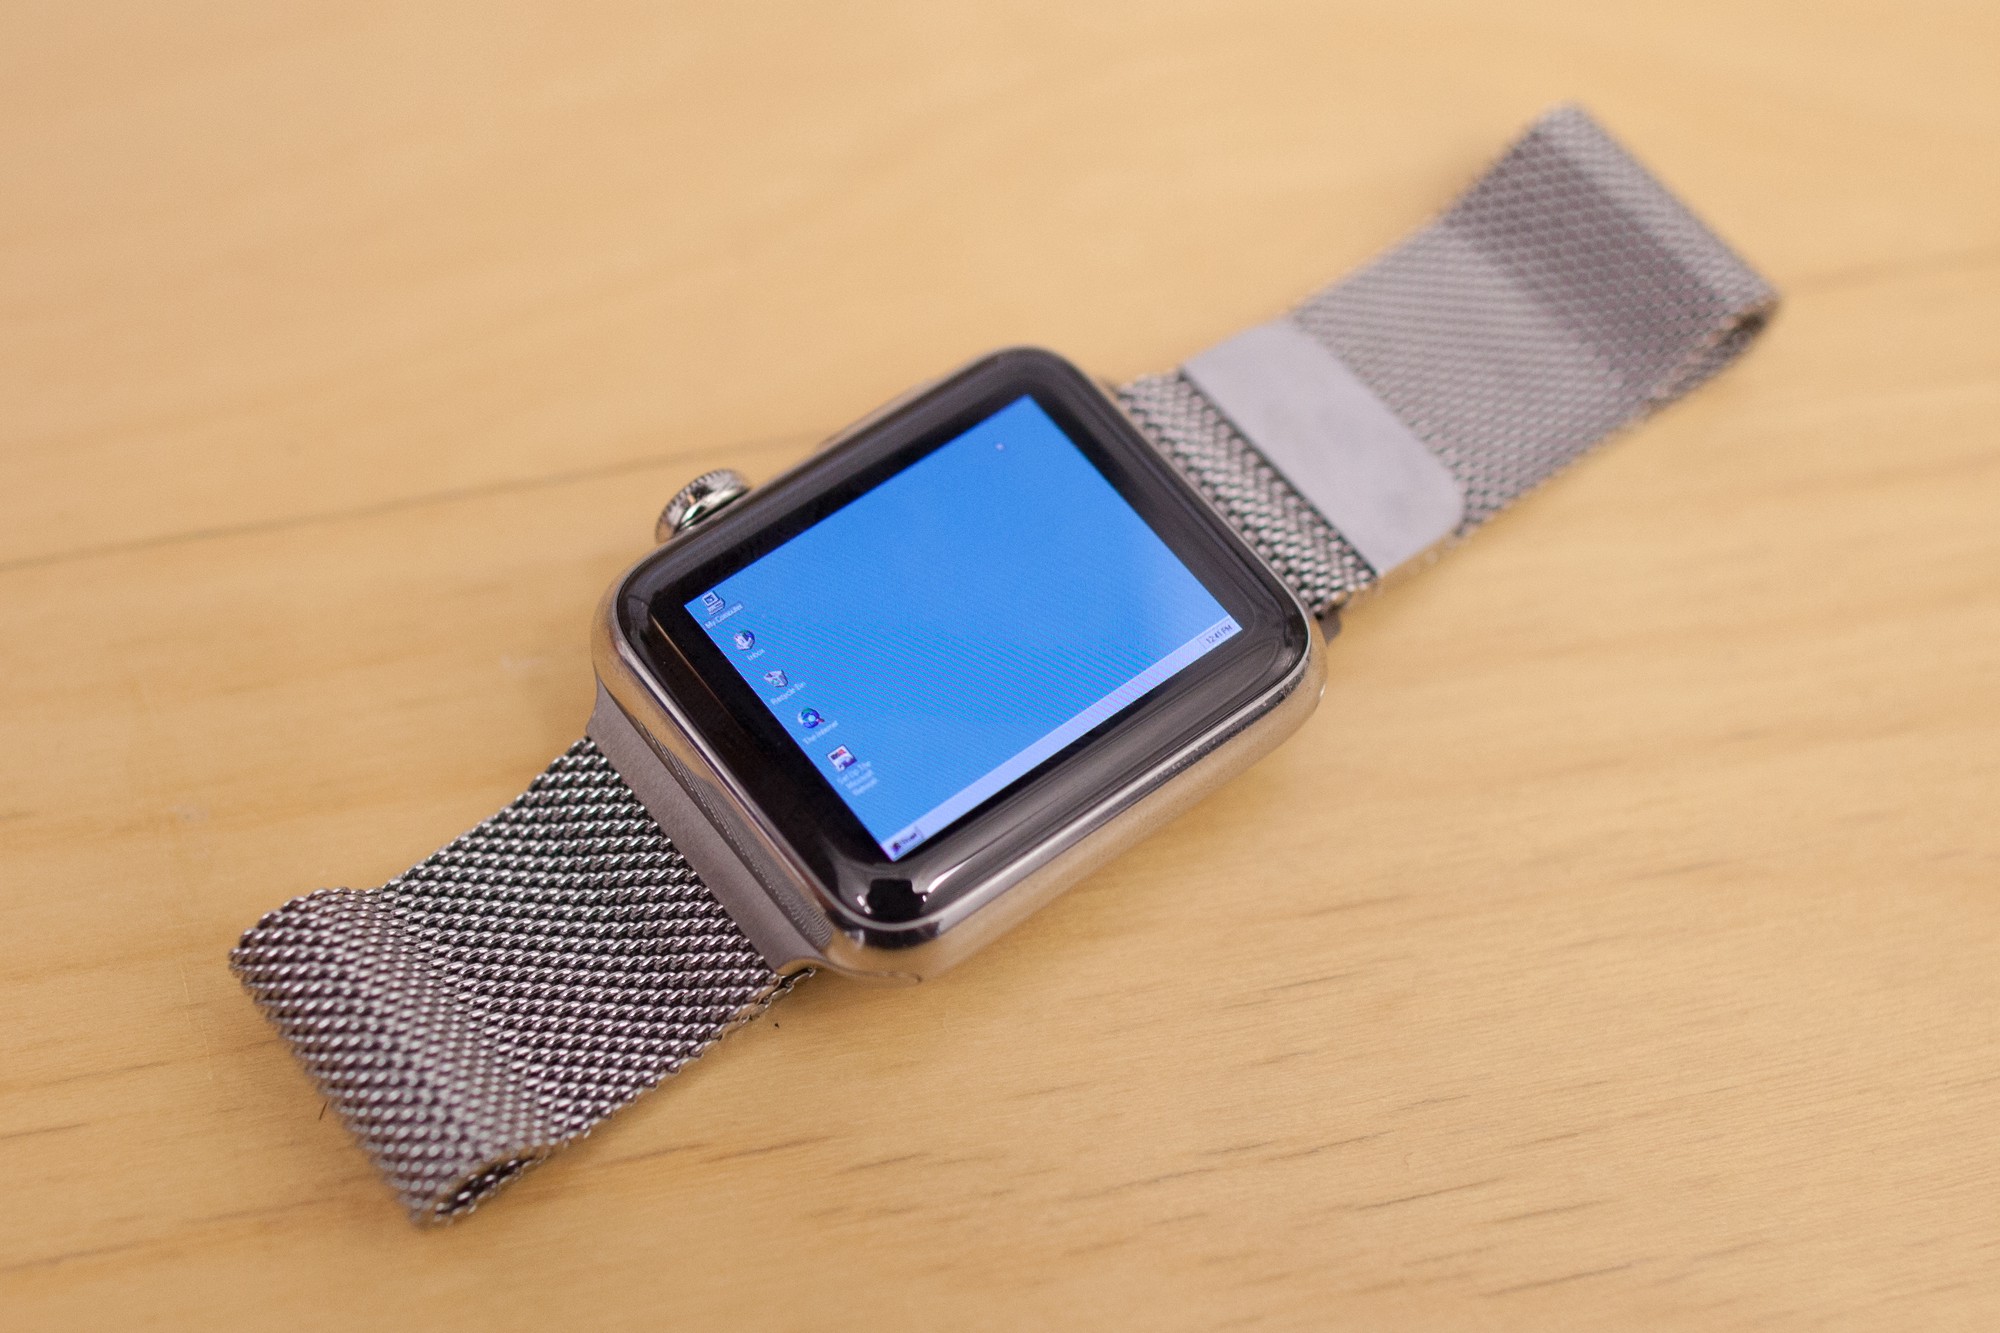 I don't know why, but a developer managed to install Windows 95 on an Apple Watch